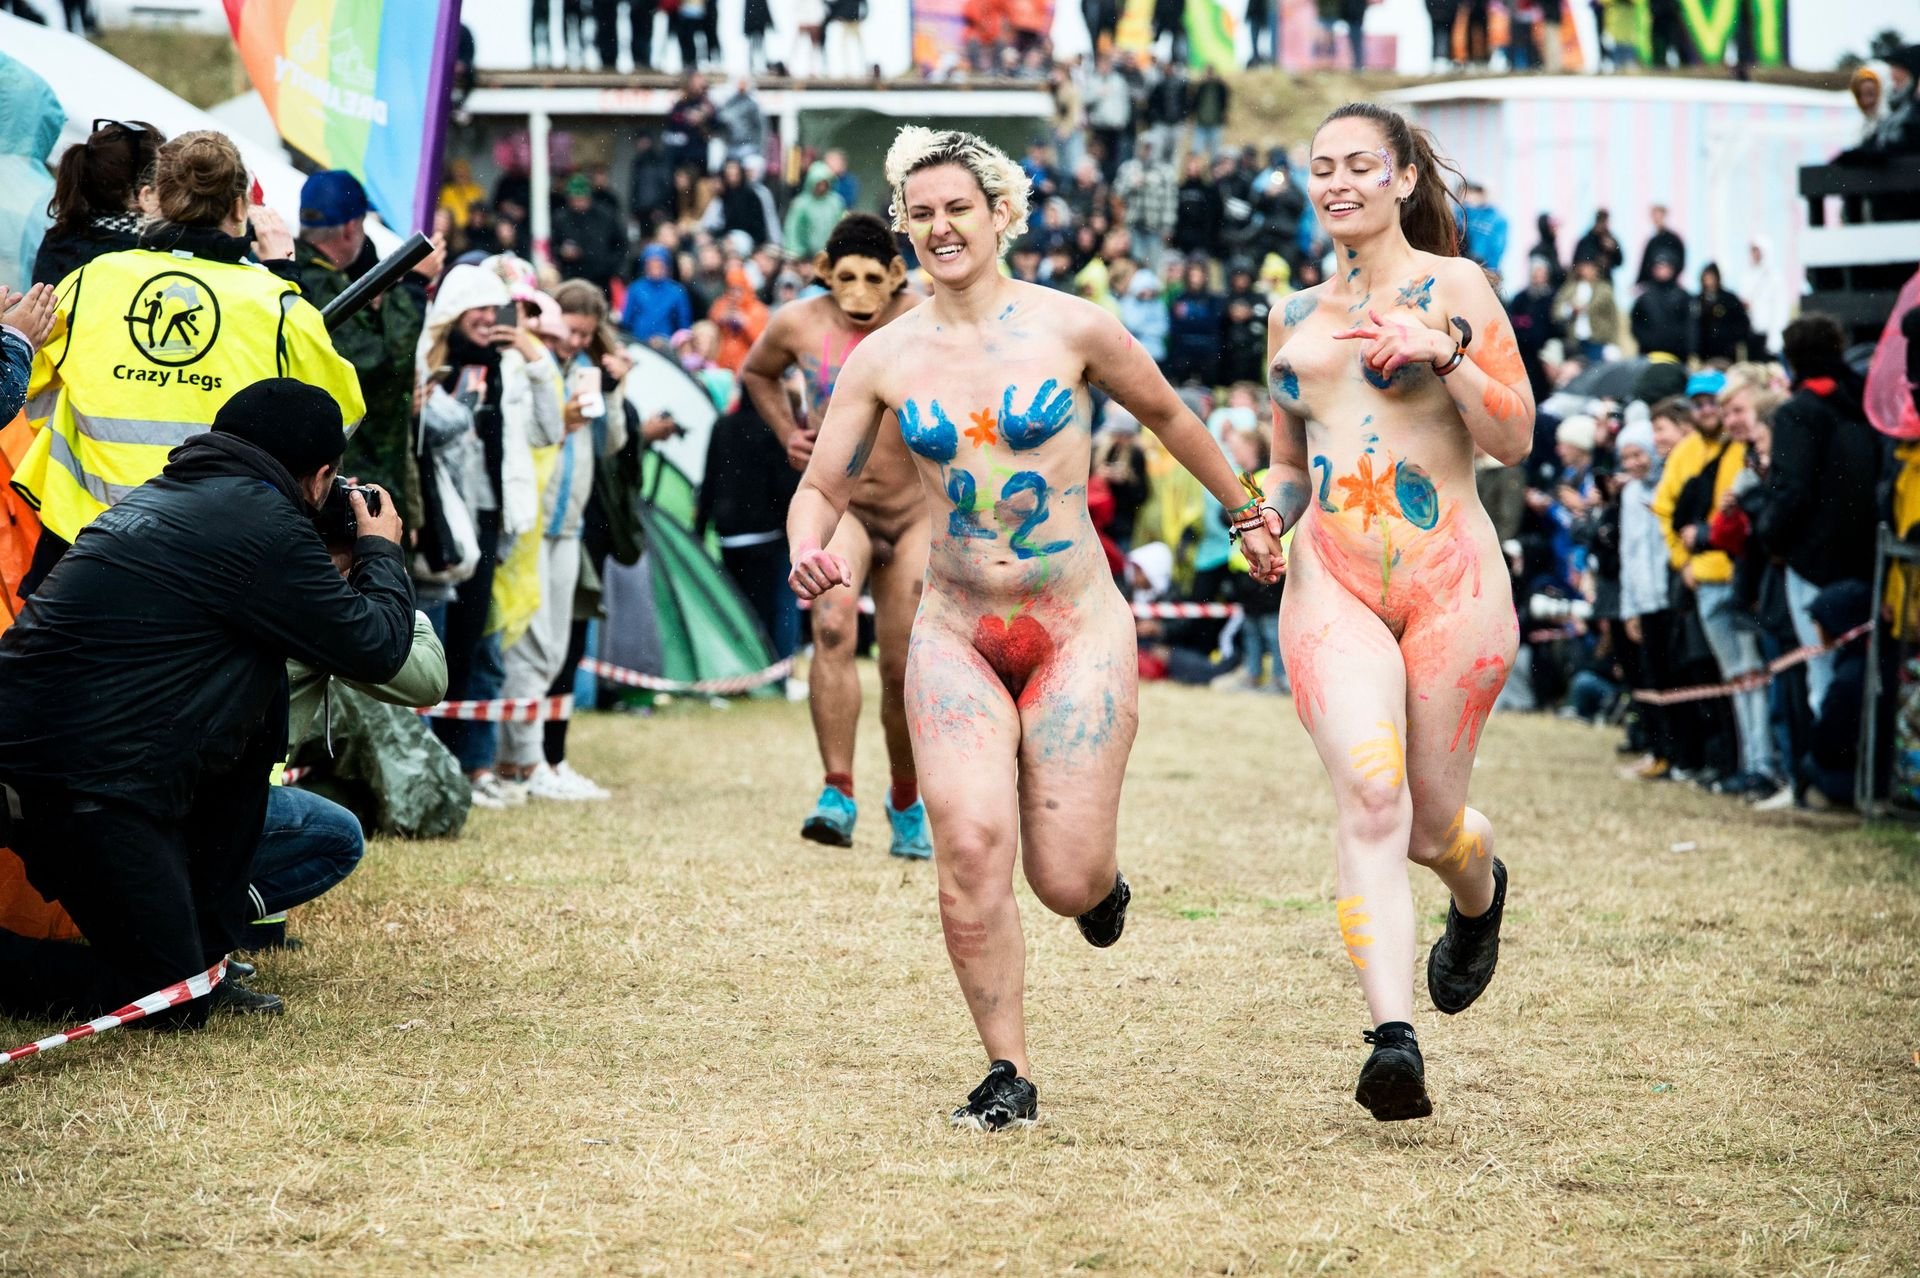 Naked run at the Roskilde Festival (5 Photos) .